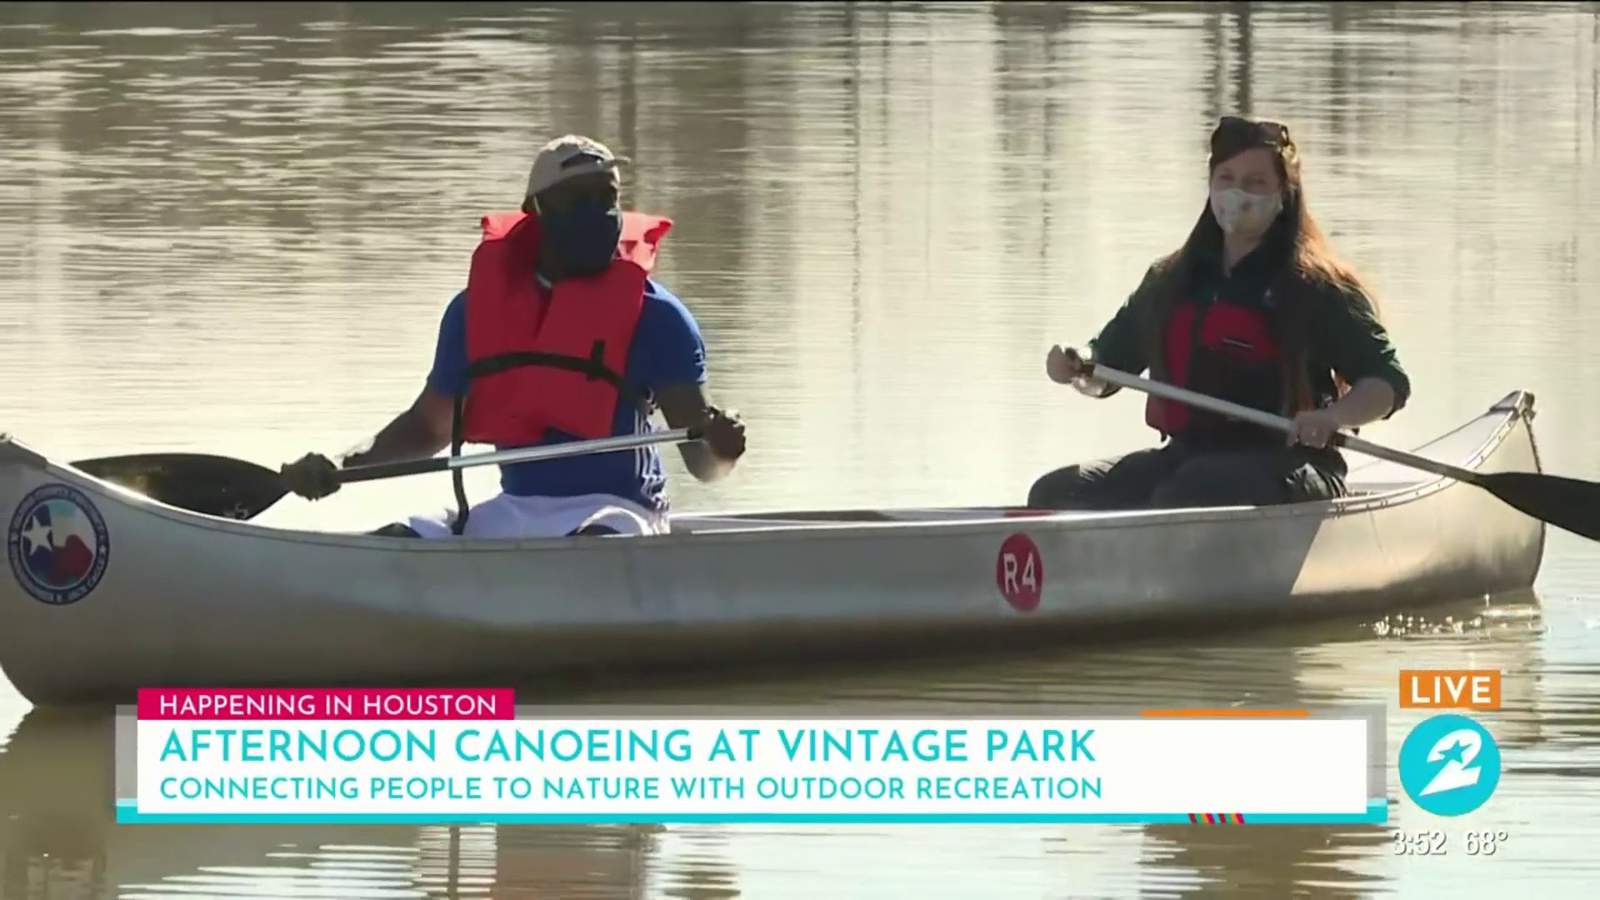 Free afternoon canoeing being offered at several Houston parks